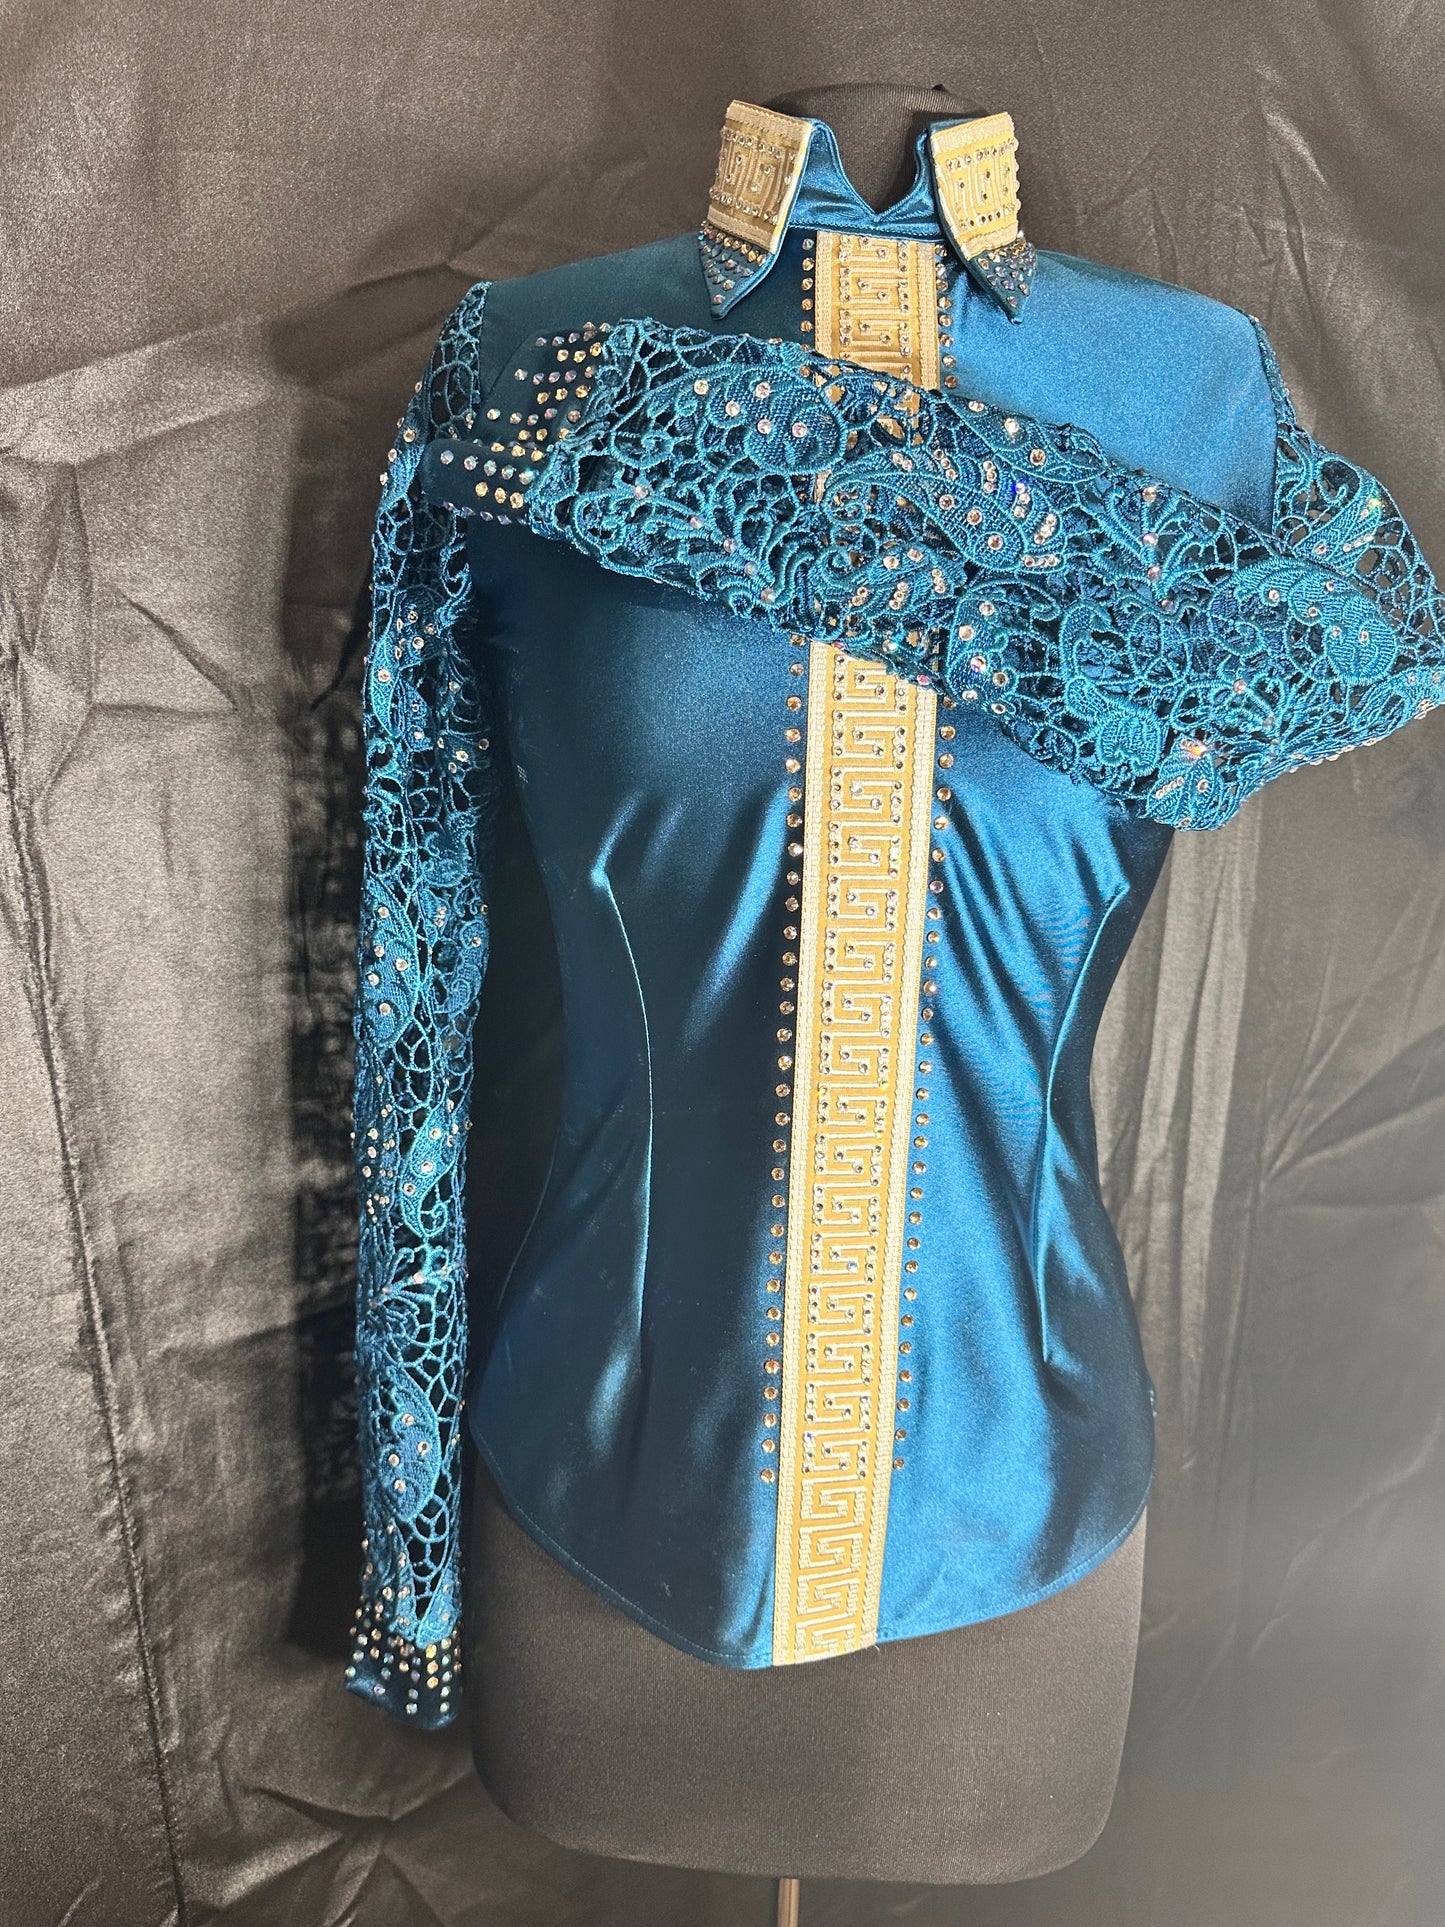 Size small teal back zip day shirt with lace sleeves